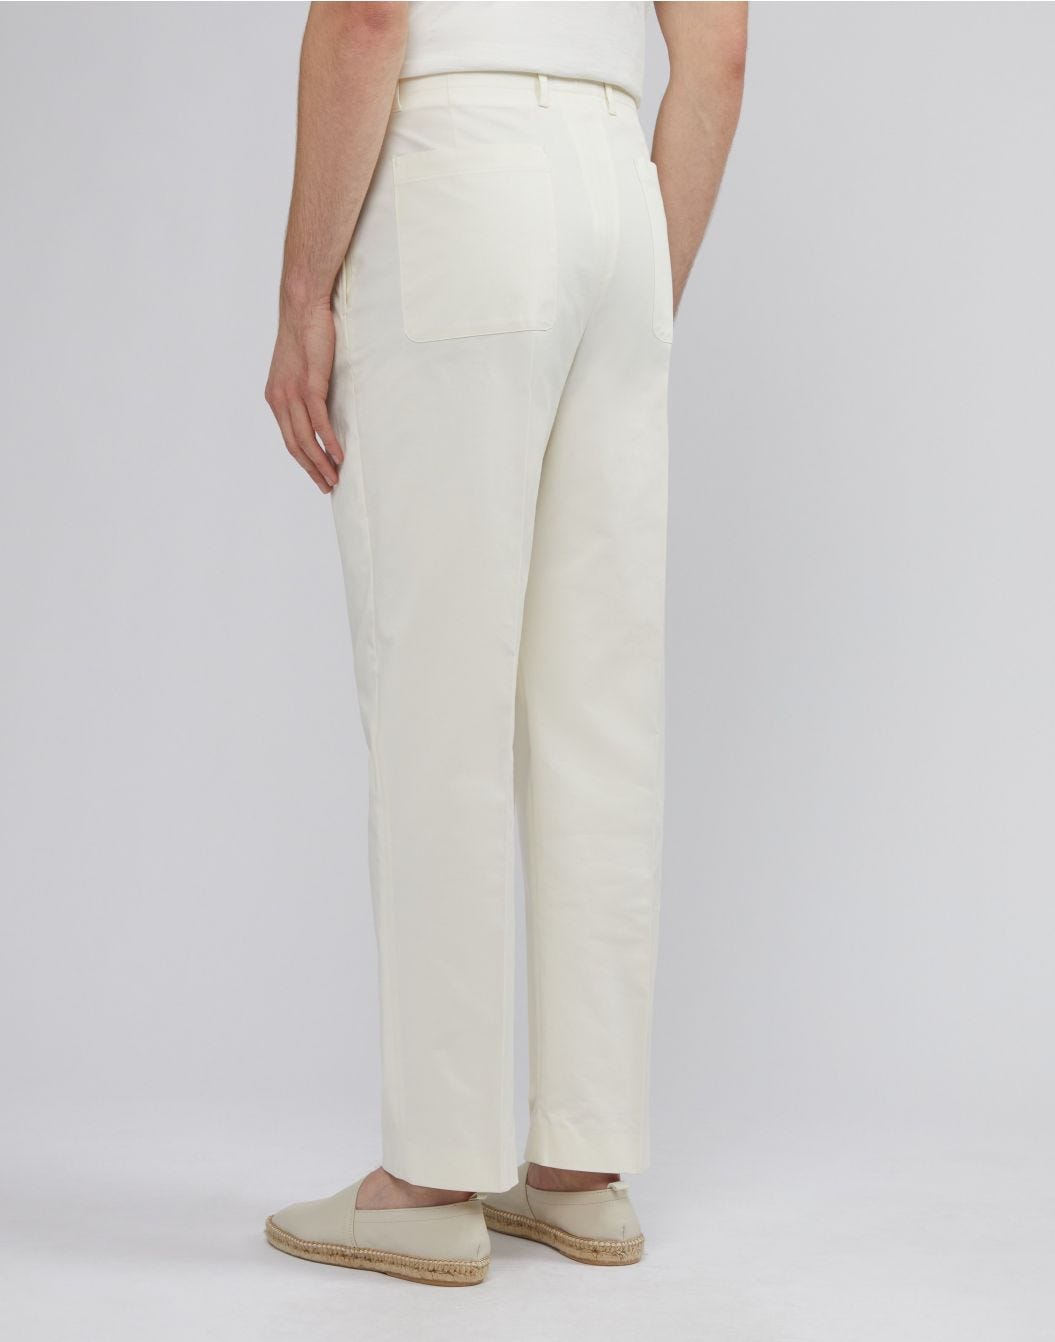 Beige stretch cotton drill trousers